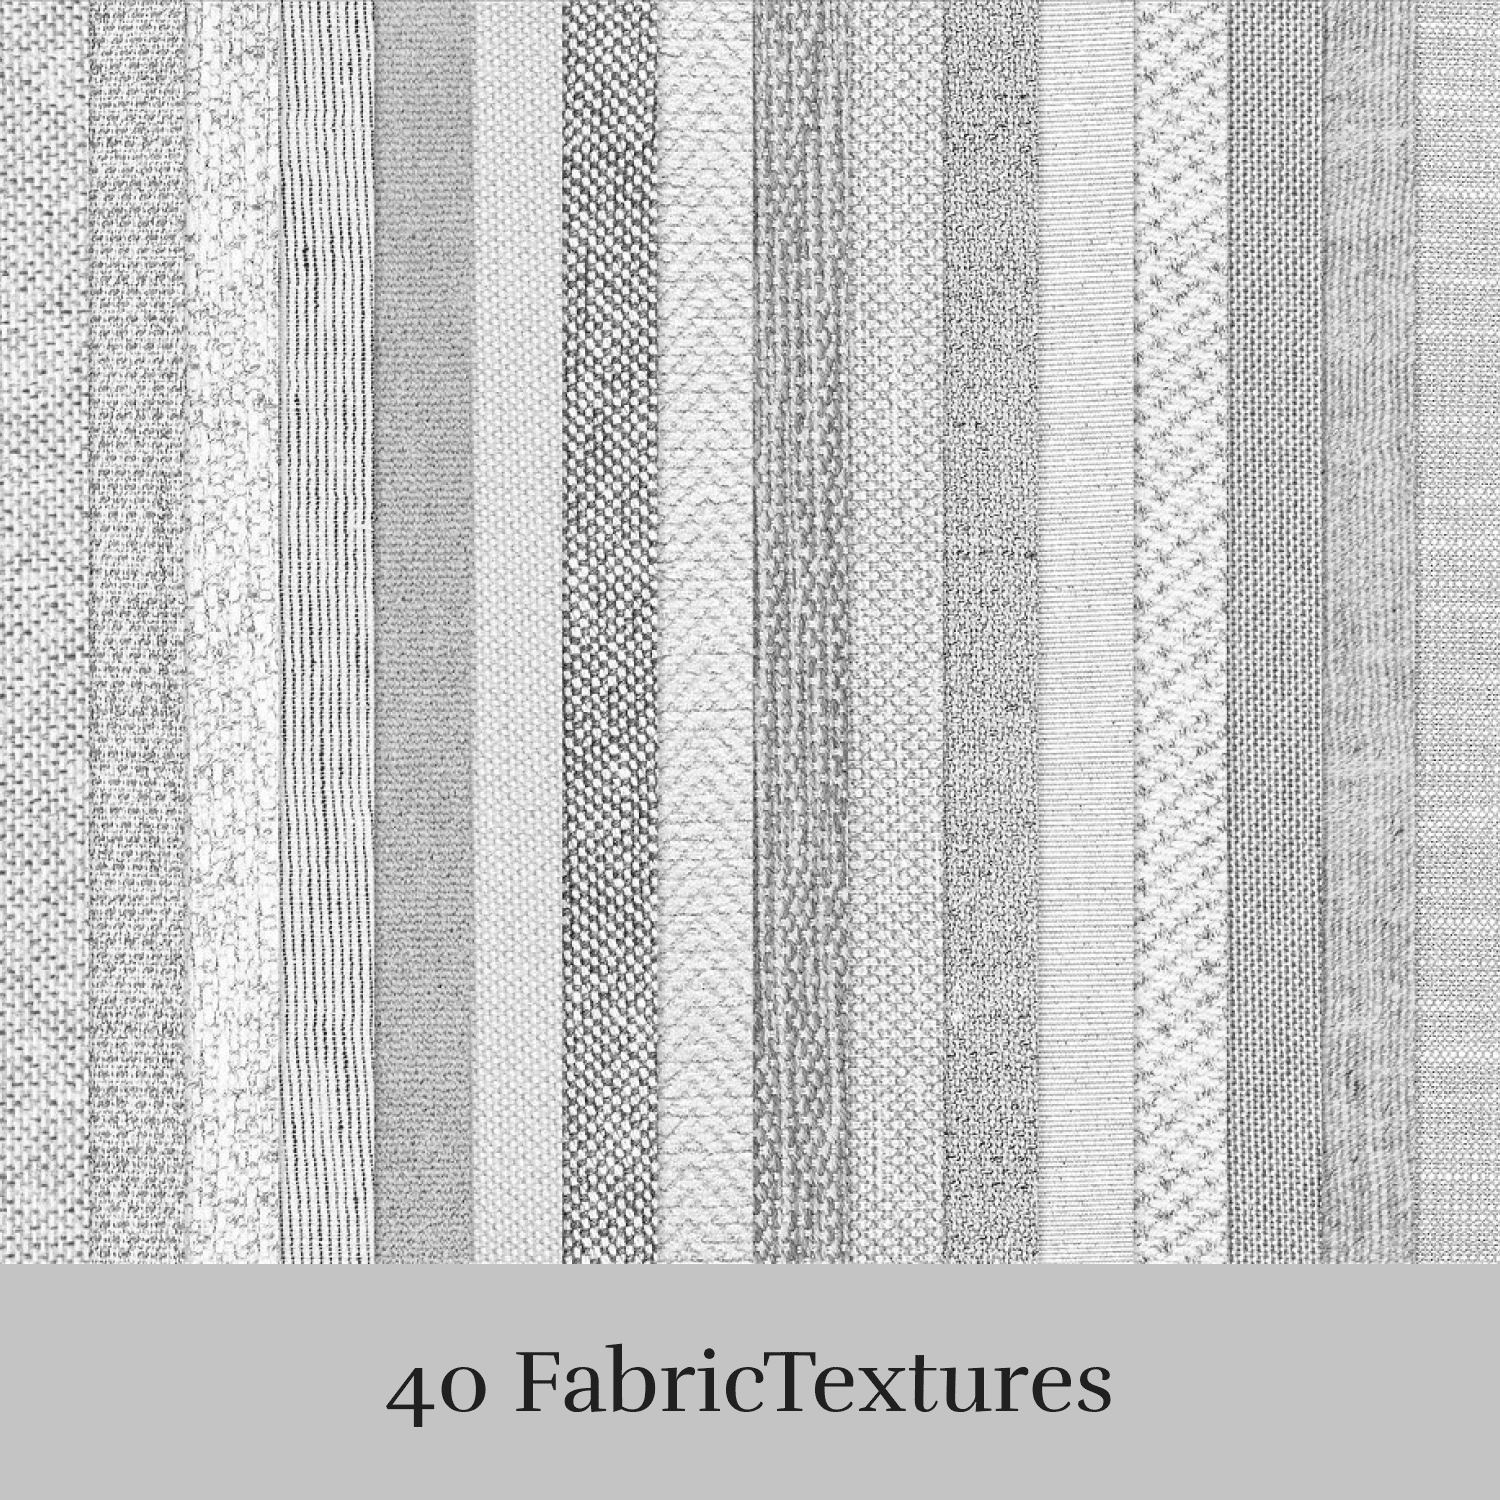 40 Fabric Textures cover.